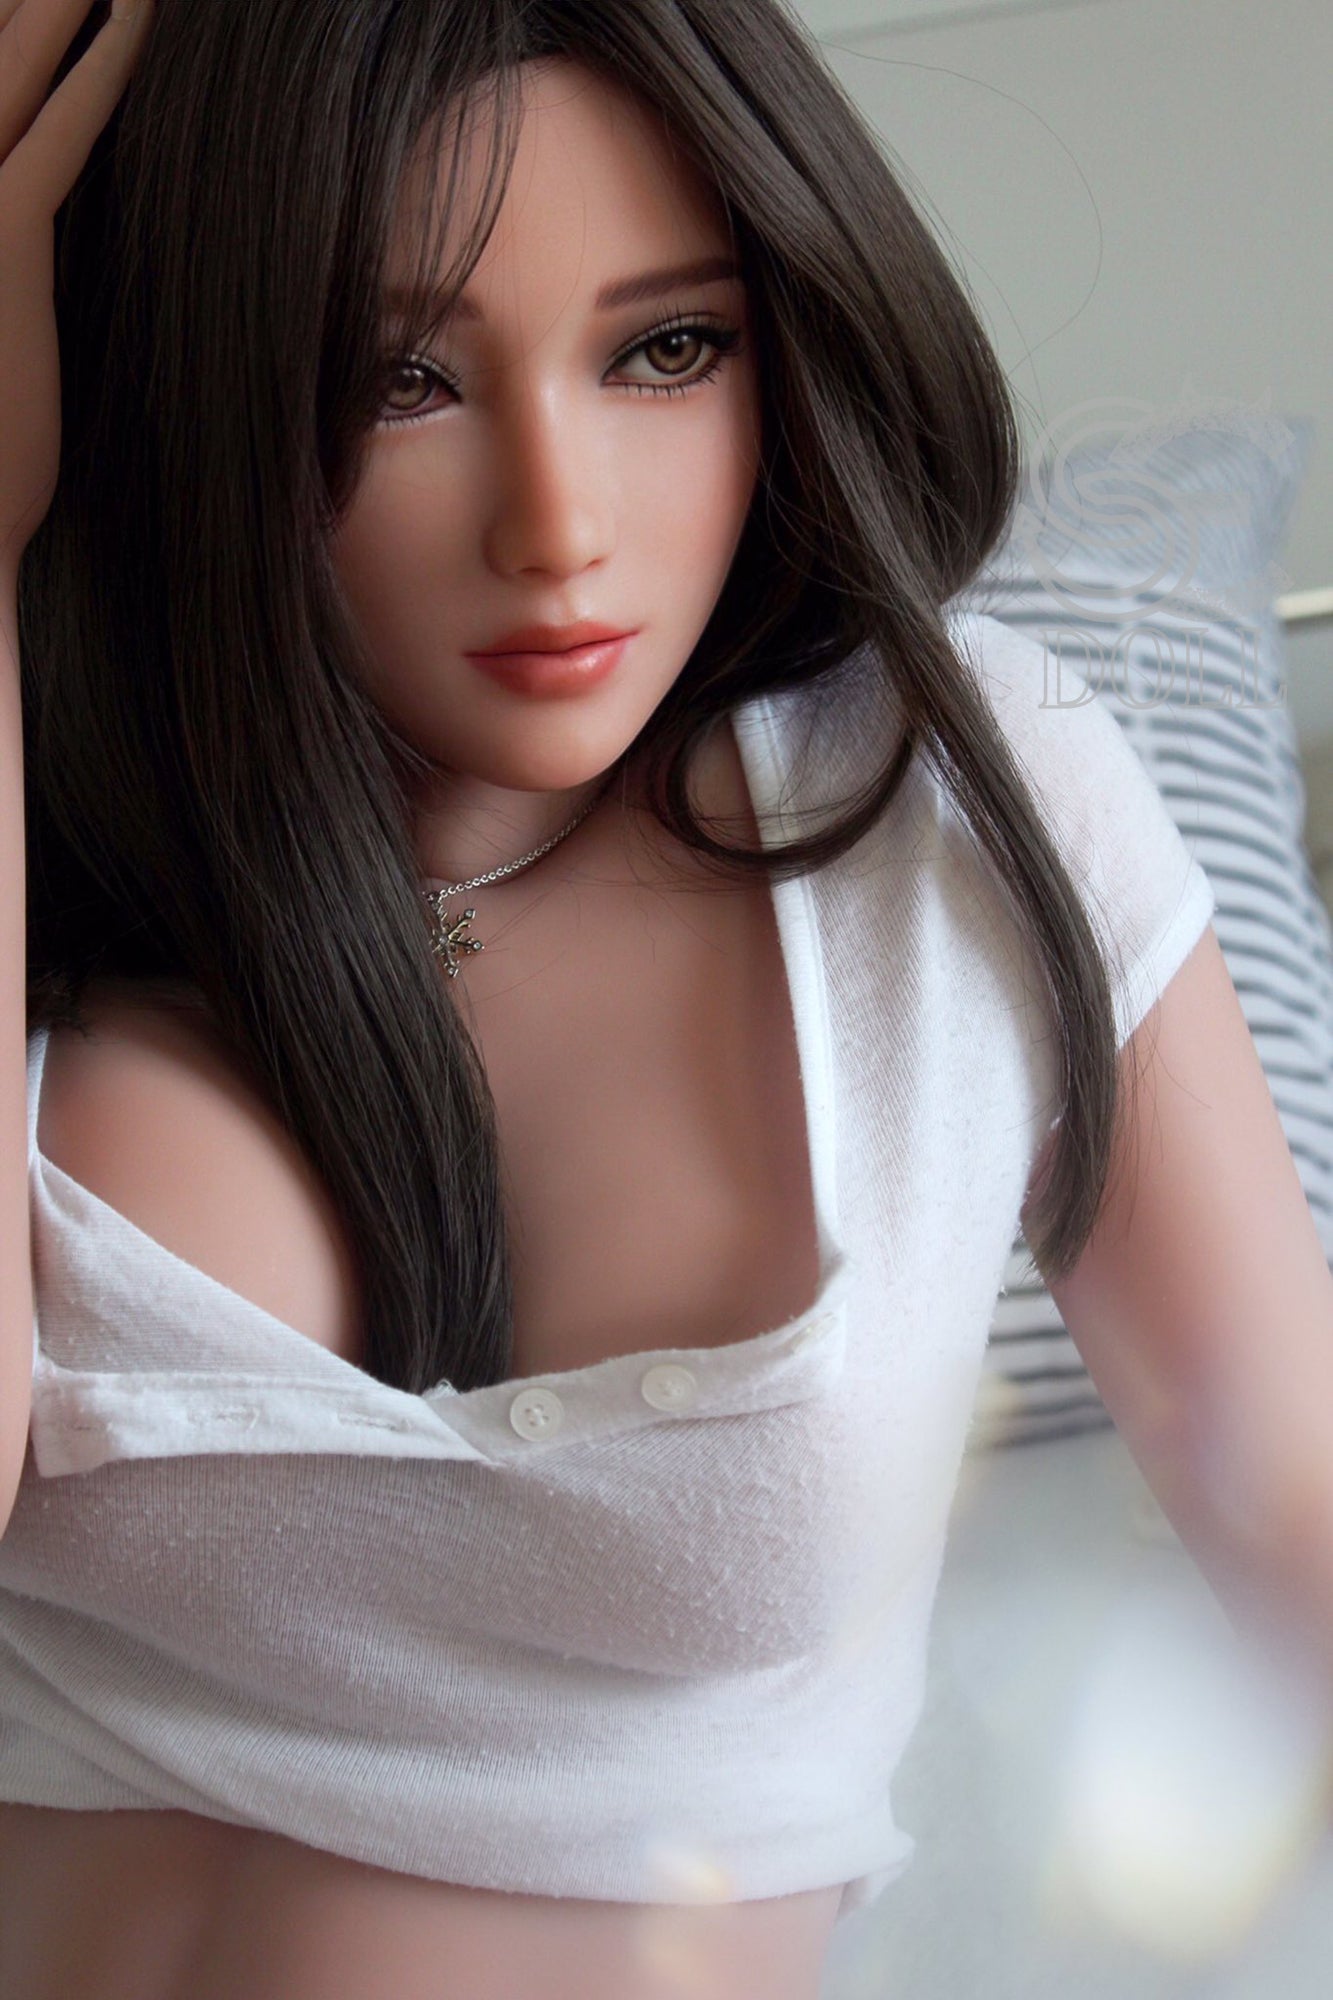 SEDOLL 163 cm E TPE - Jacey | Buy Sex Dolls at DOLLS ACTUALLY